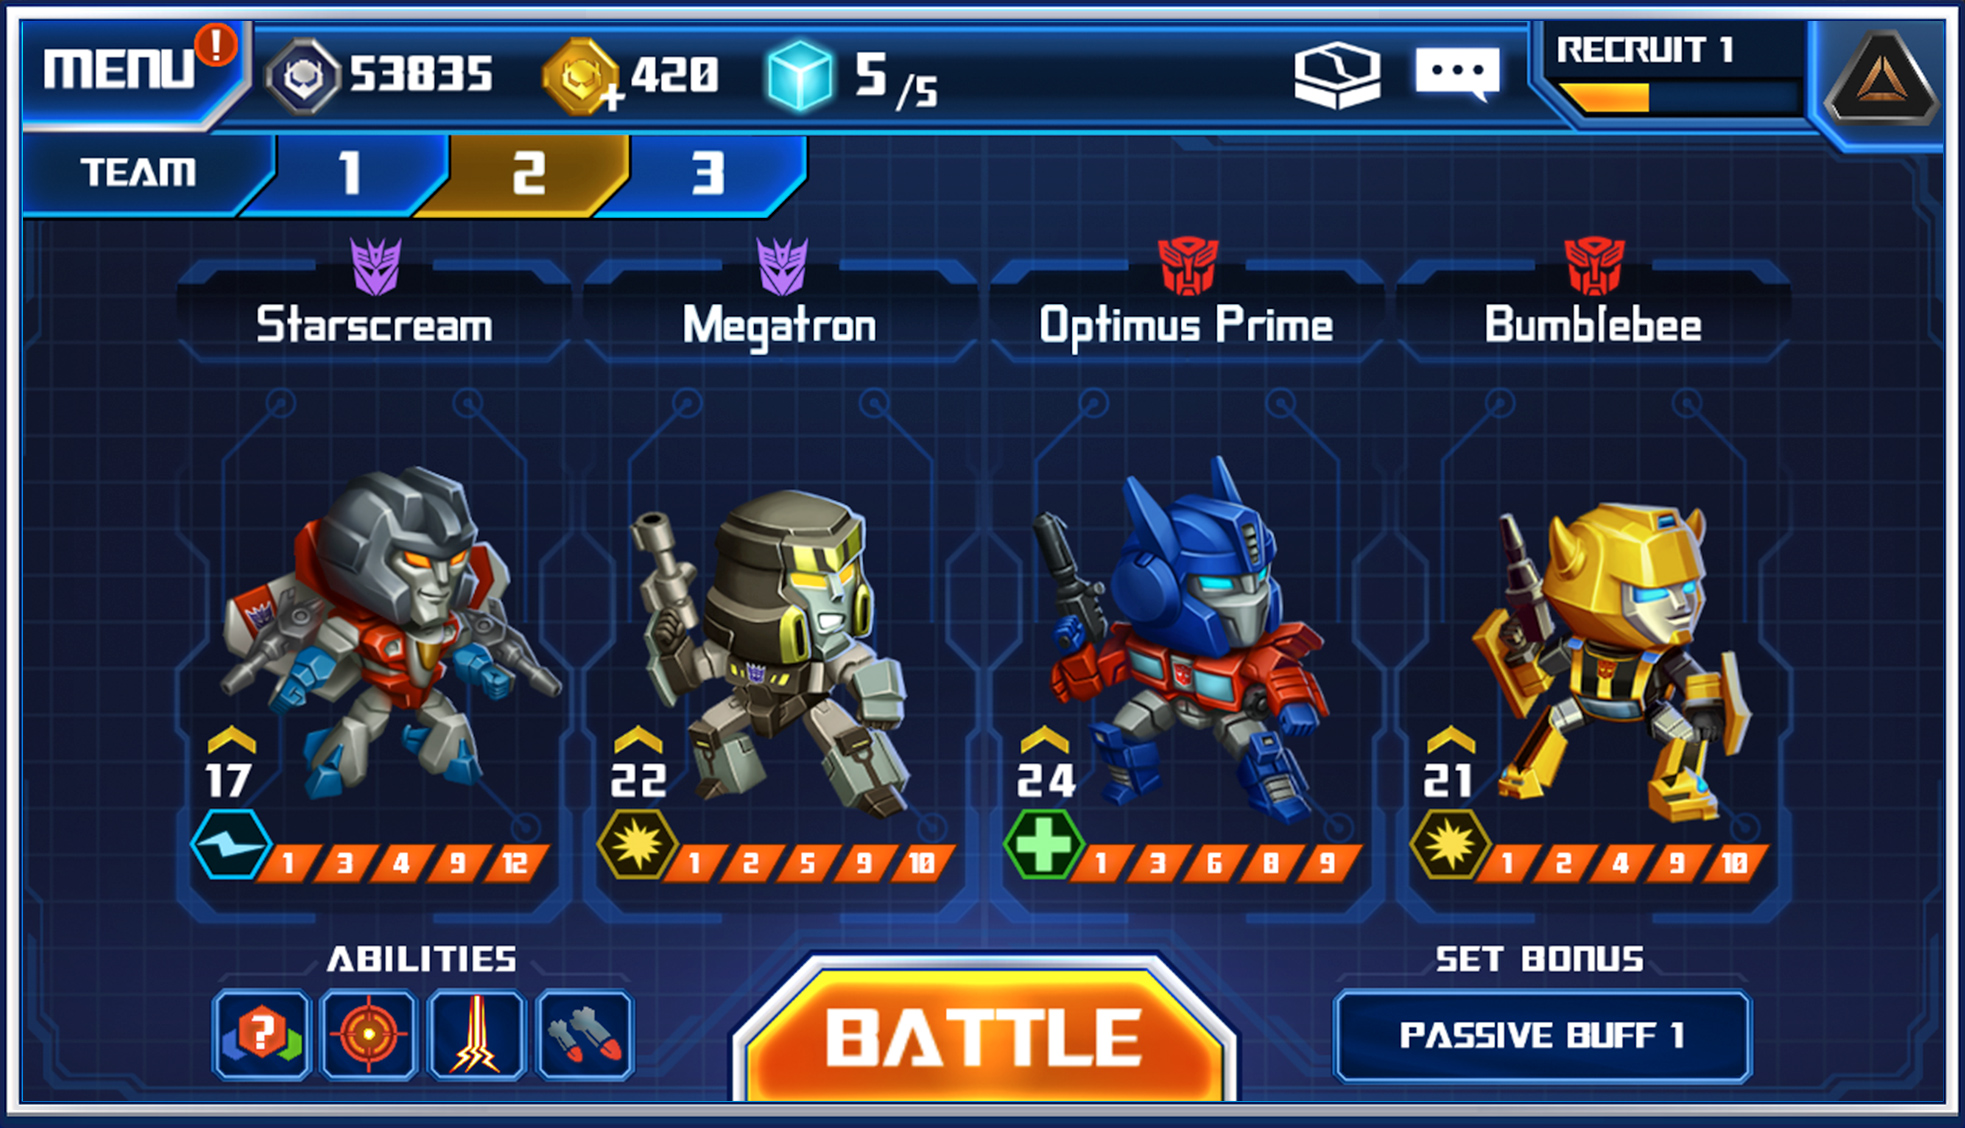 [Jeu Mobile] Transformers - Angry Birds, Forged to Fight, Earth Wars, Bumblebee Overdrive, etc - Page 6 Plain-battle-04